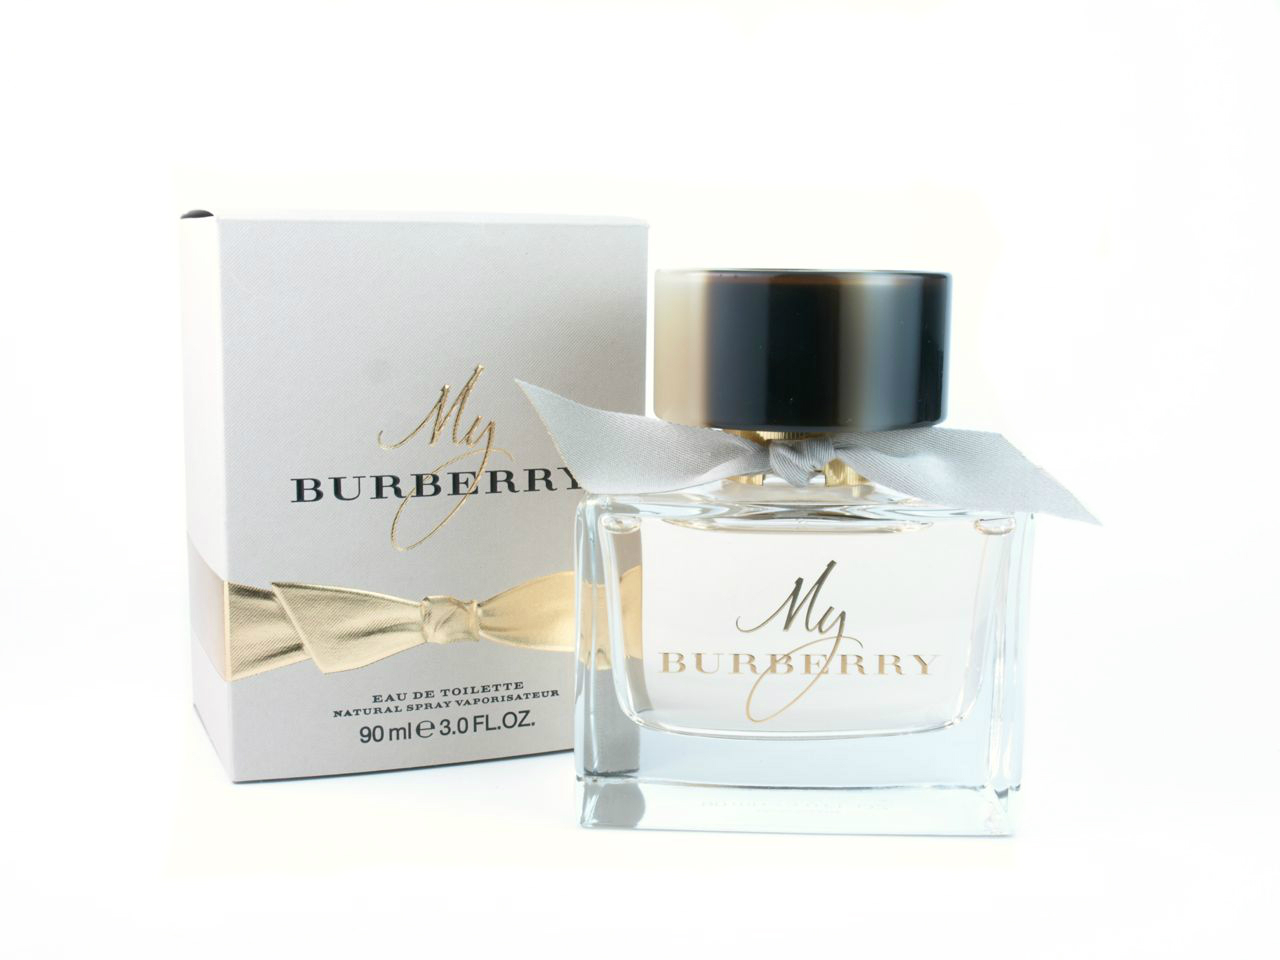 Burberry My Burberry de Toilette: Review | The Happy Sloths: Beauty, Makeup, and Skincare Blog with Reviews and Swatches